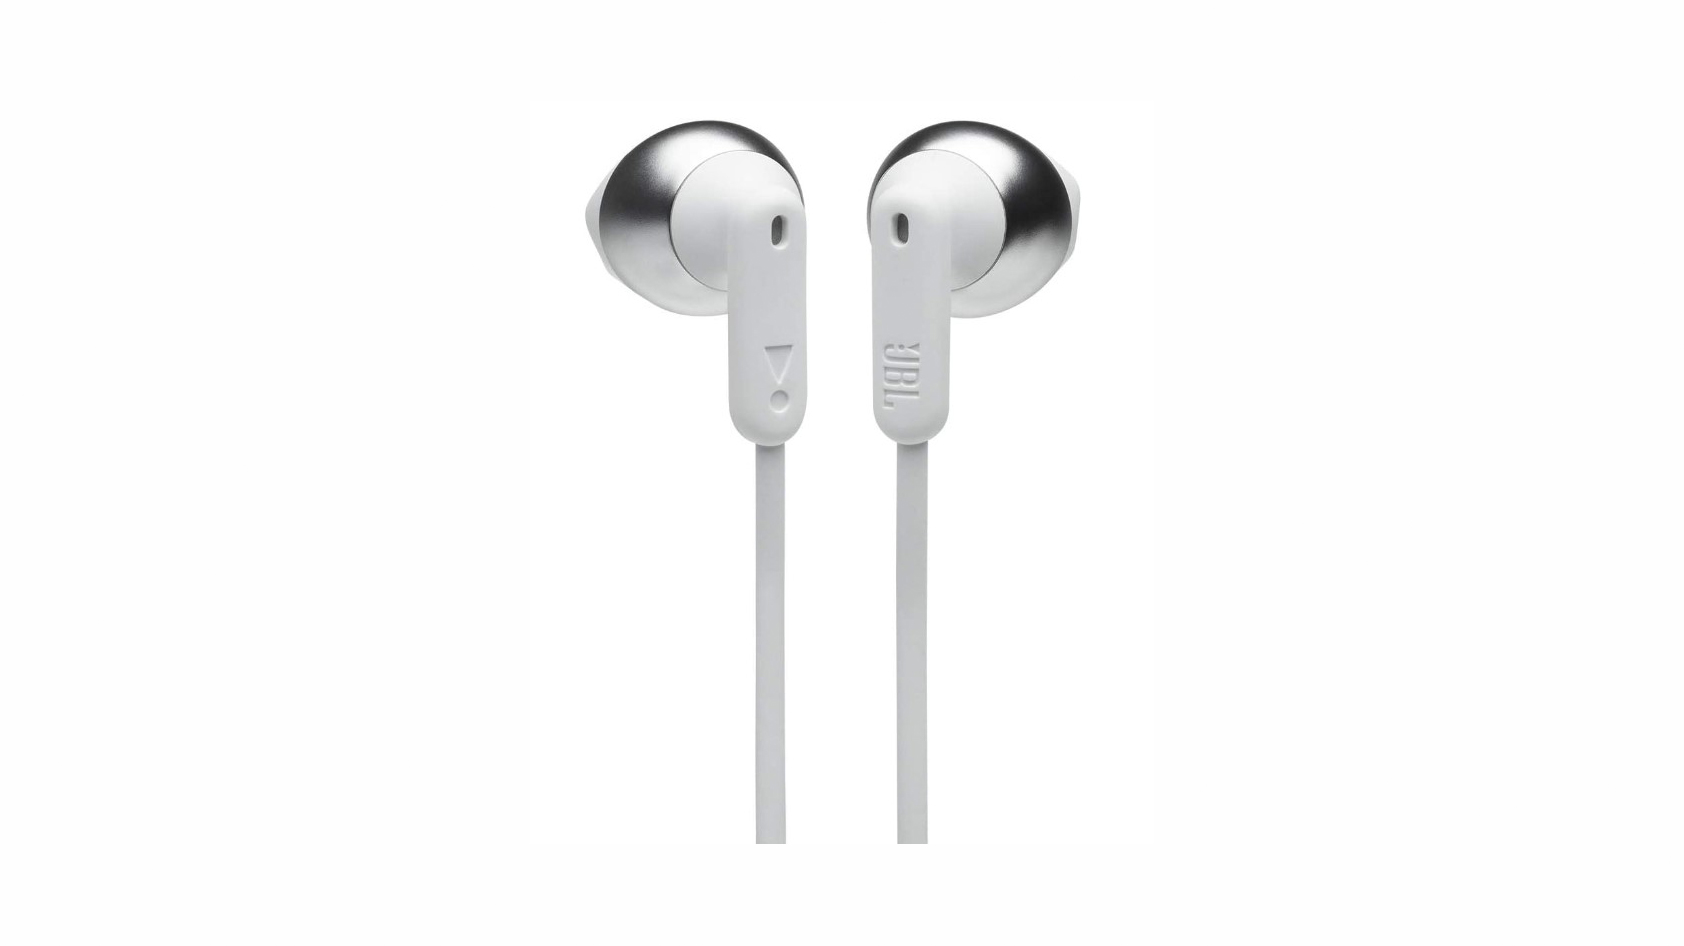 A close up of the JBL Tune 215BT wireless neckband earbuds shown in white and silver.